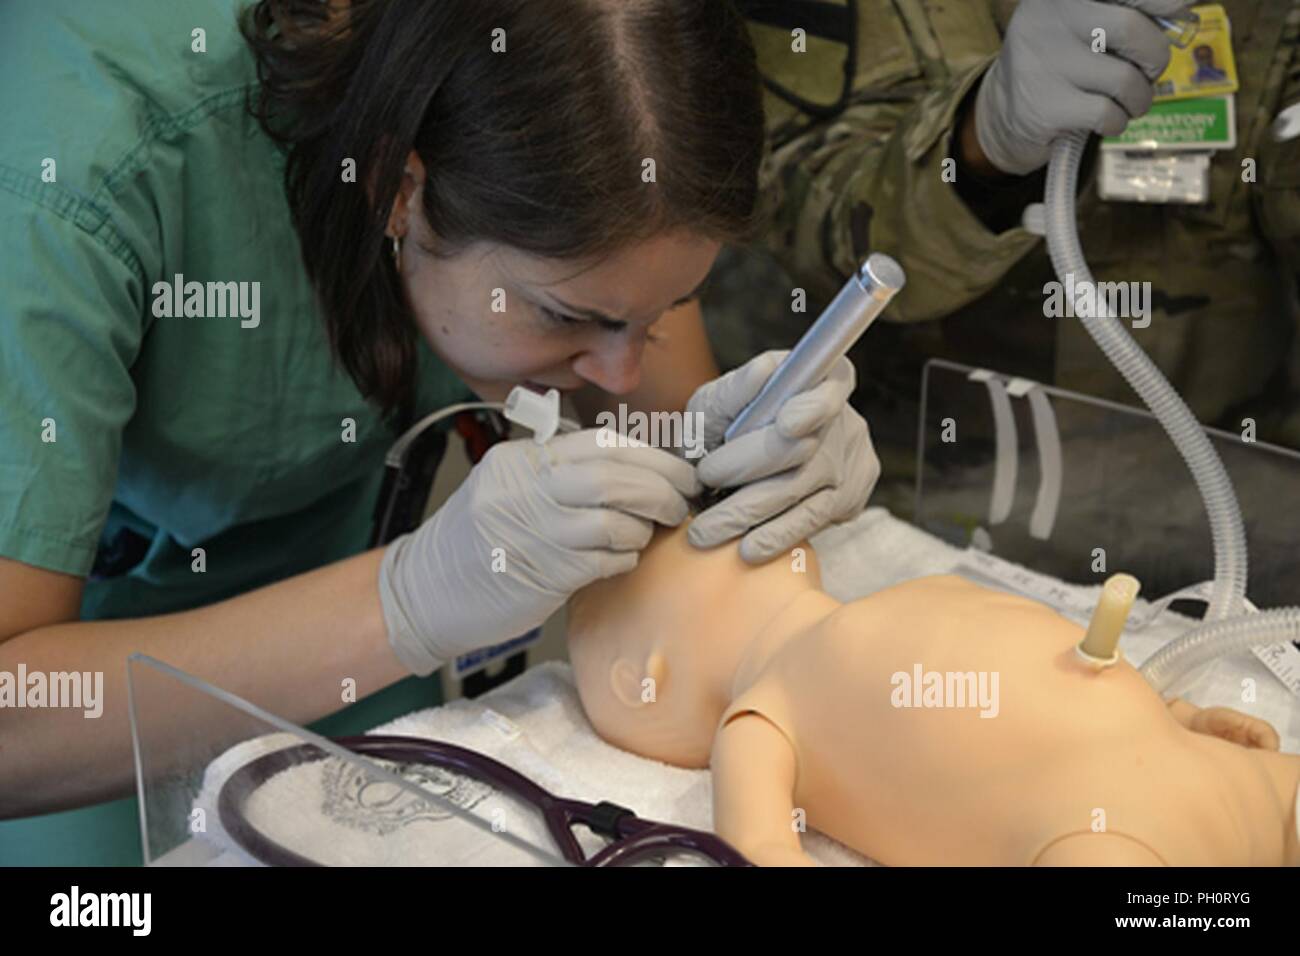 General Leonard Wood Army Community Hospital, in partnership with St. Louis Children’s Hospital and Barnes-Jewish Hospital, completed a high-fidelity simulation June 14 to prepare the staff to function as a team during a high stress situation. Stock Photo